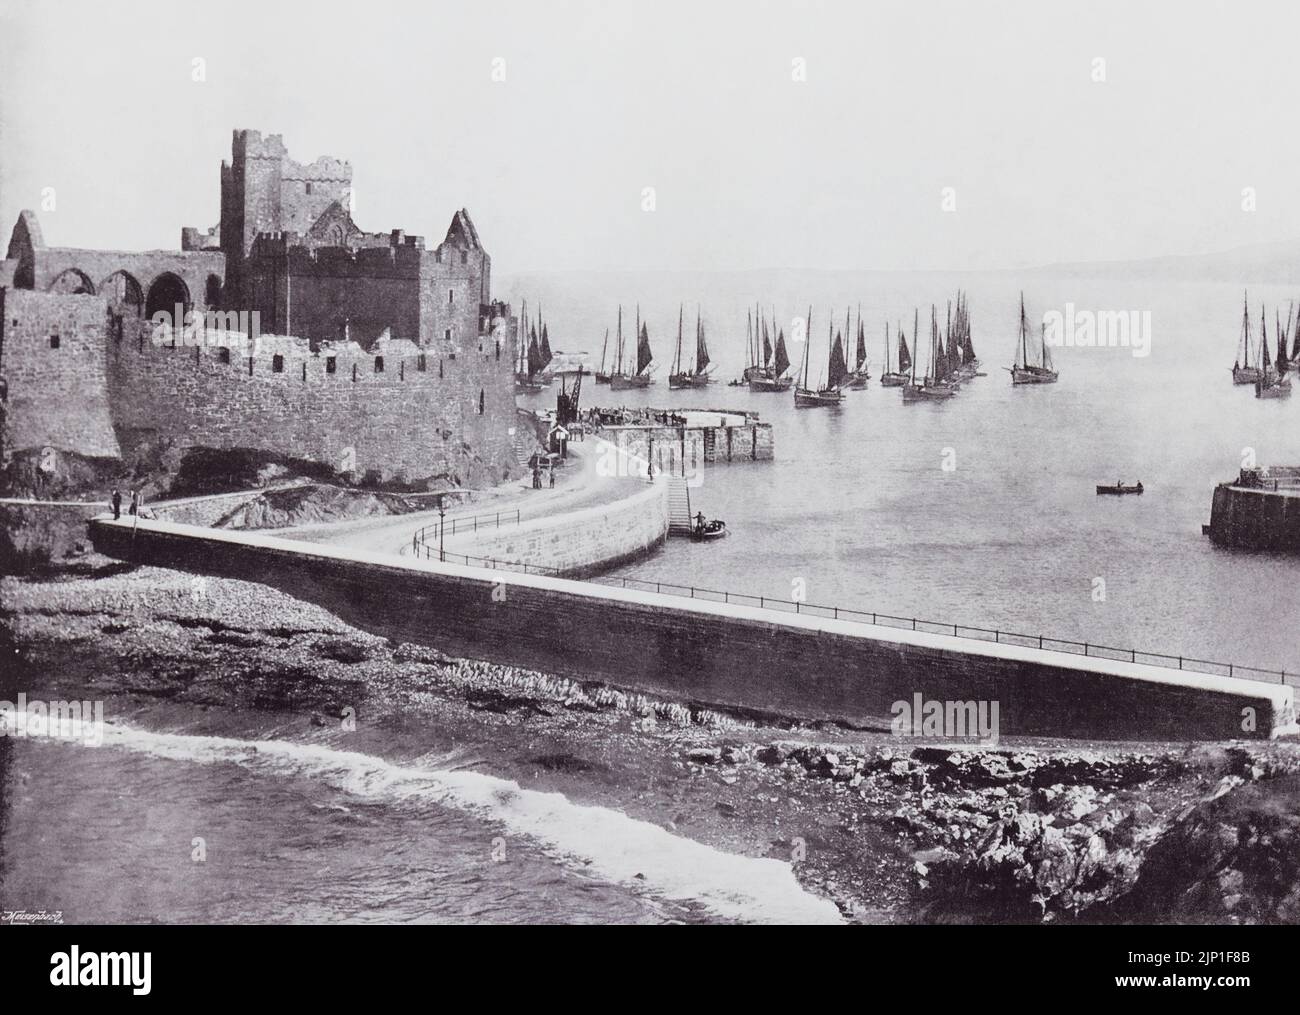 Peel, Isle of Man. The old castle and harbour, seen here in the 19th century. From Around The Coast,  An Album of Pictures from Photographs of the Chief Seaside Places of Interest in Great Britain and Ireland published London, 1895, by George Newnes Limited. Stock Photo